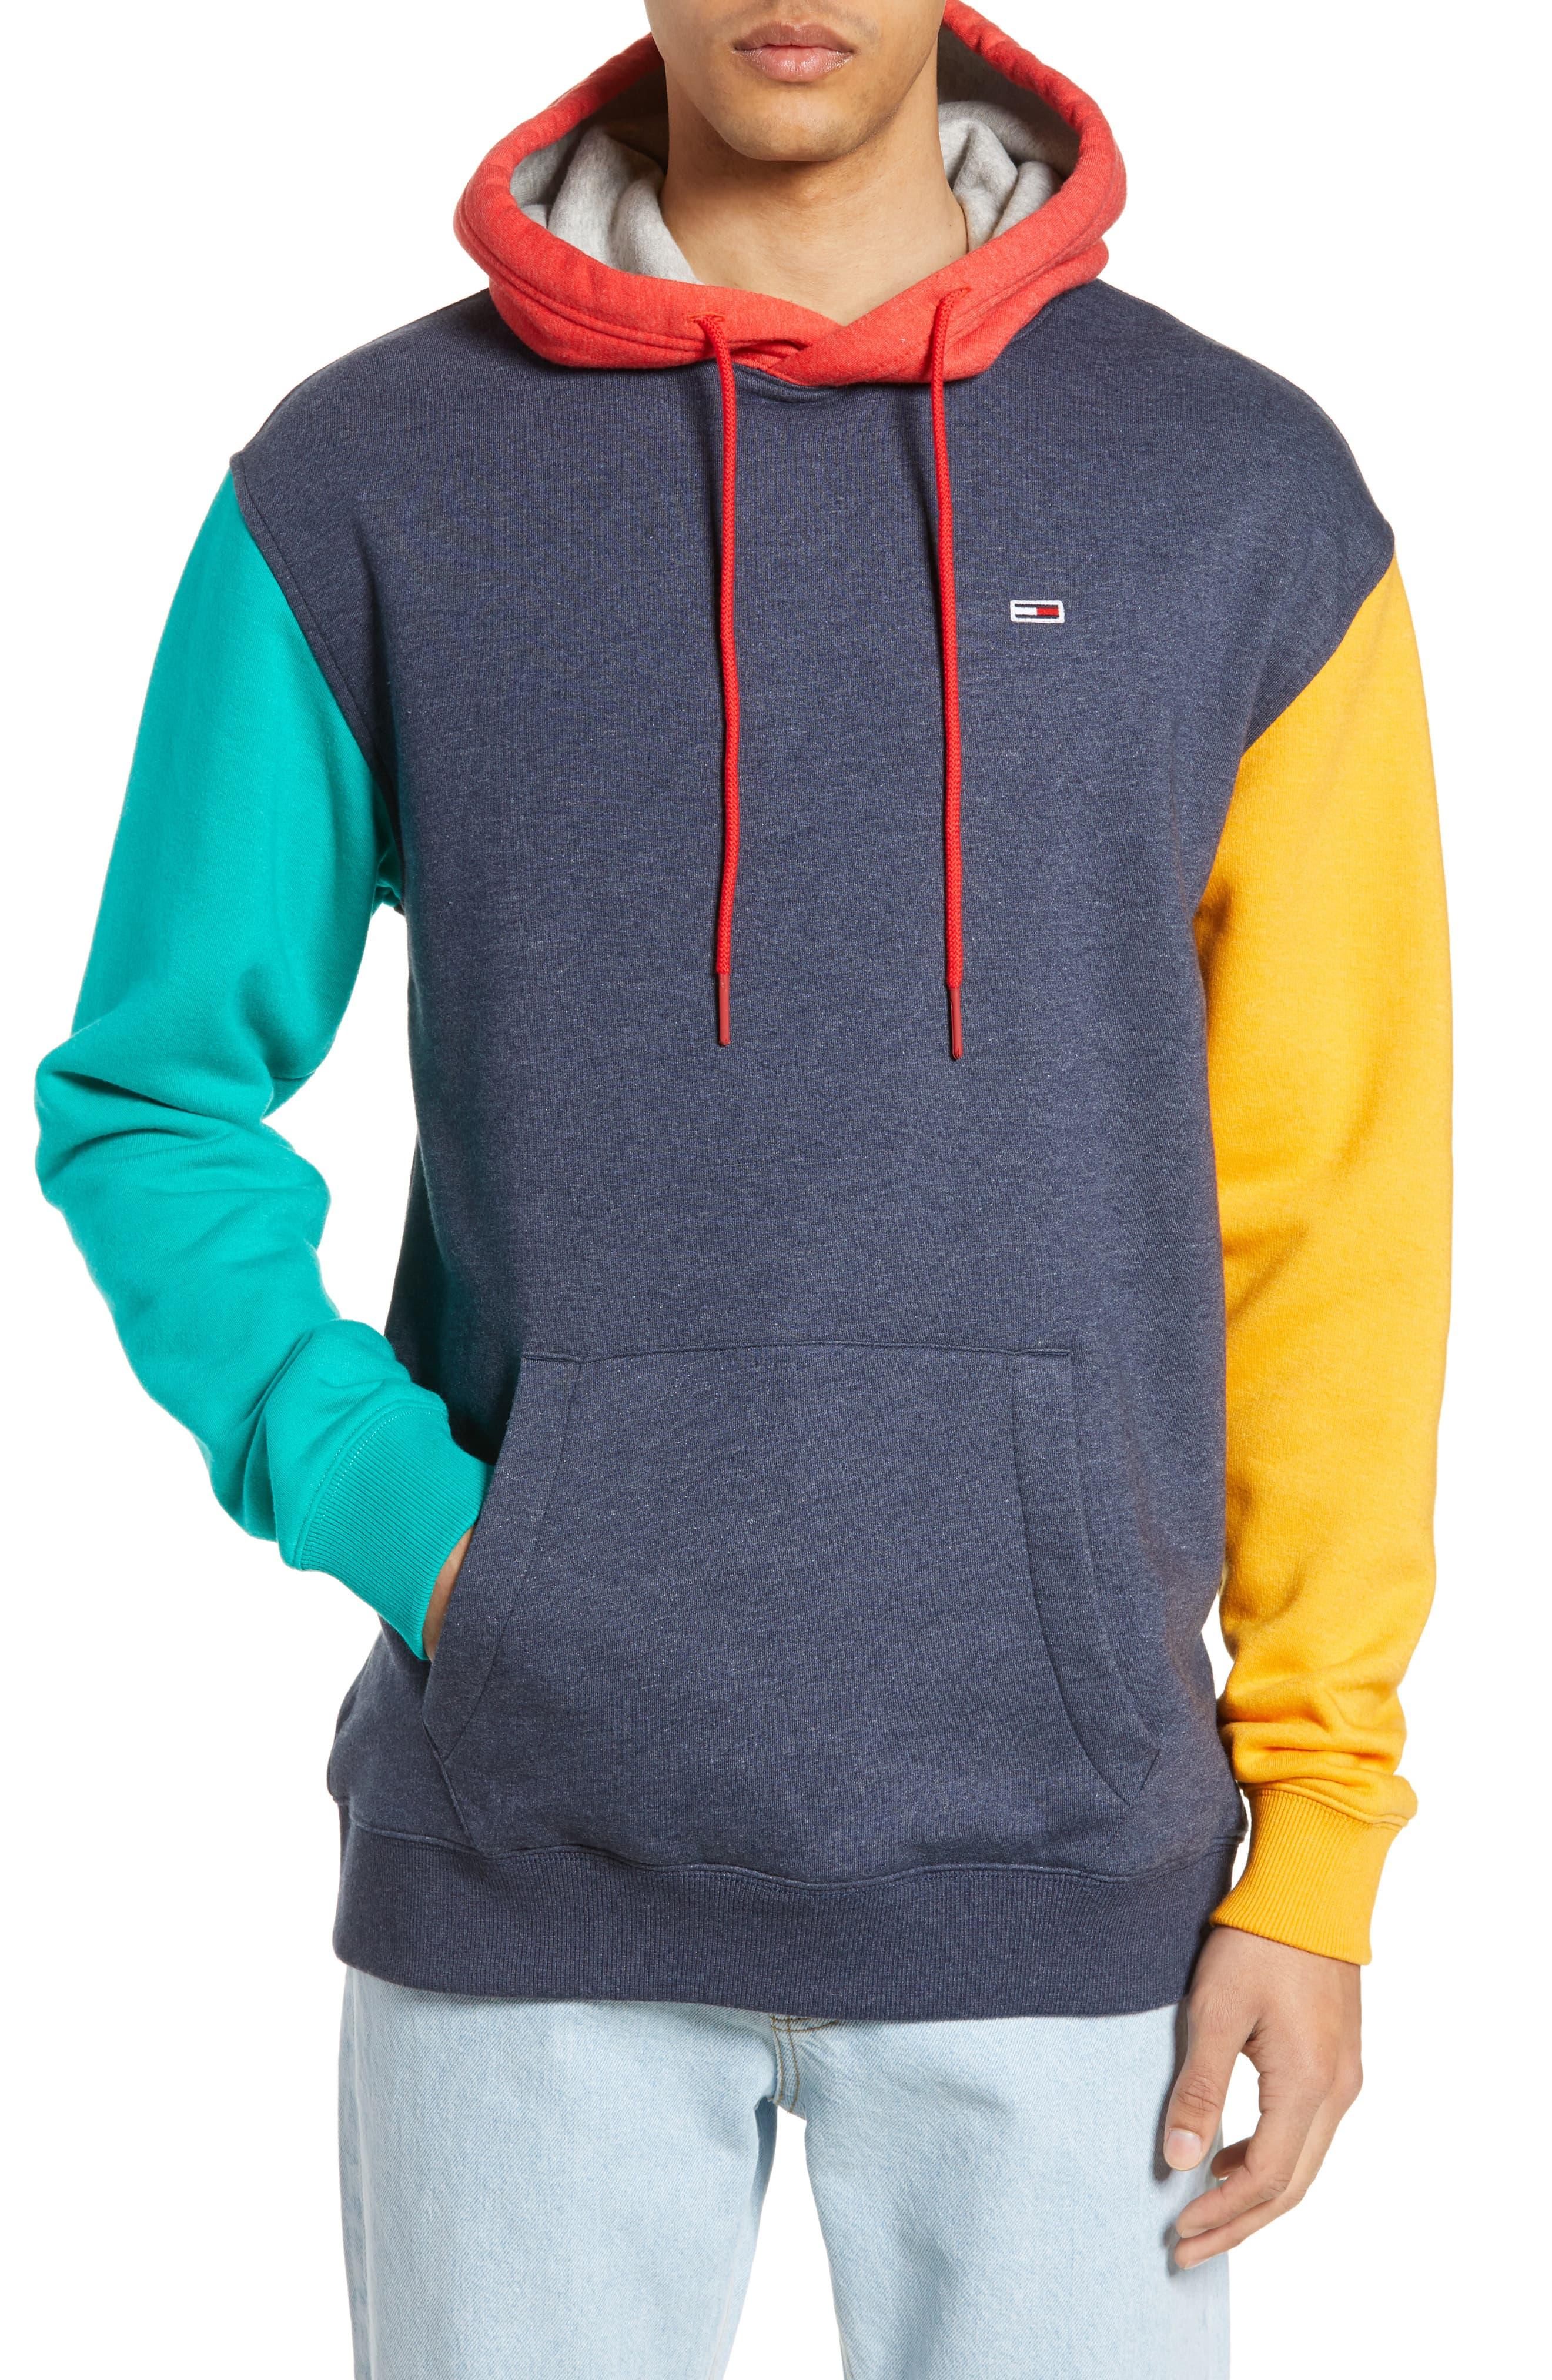 Color Block Hoodie Tommy Hilfiger Store, 50% OFF | www.osana.care